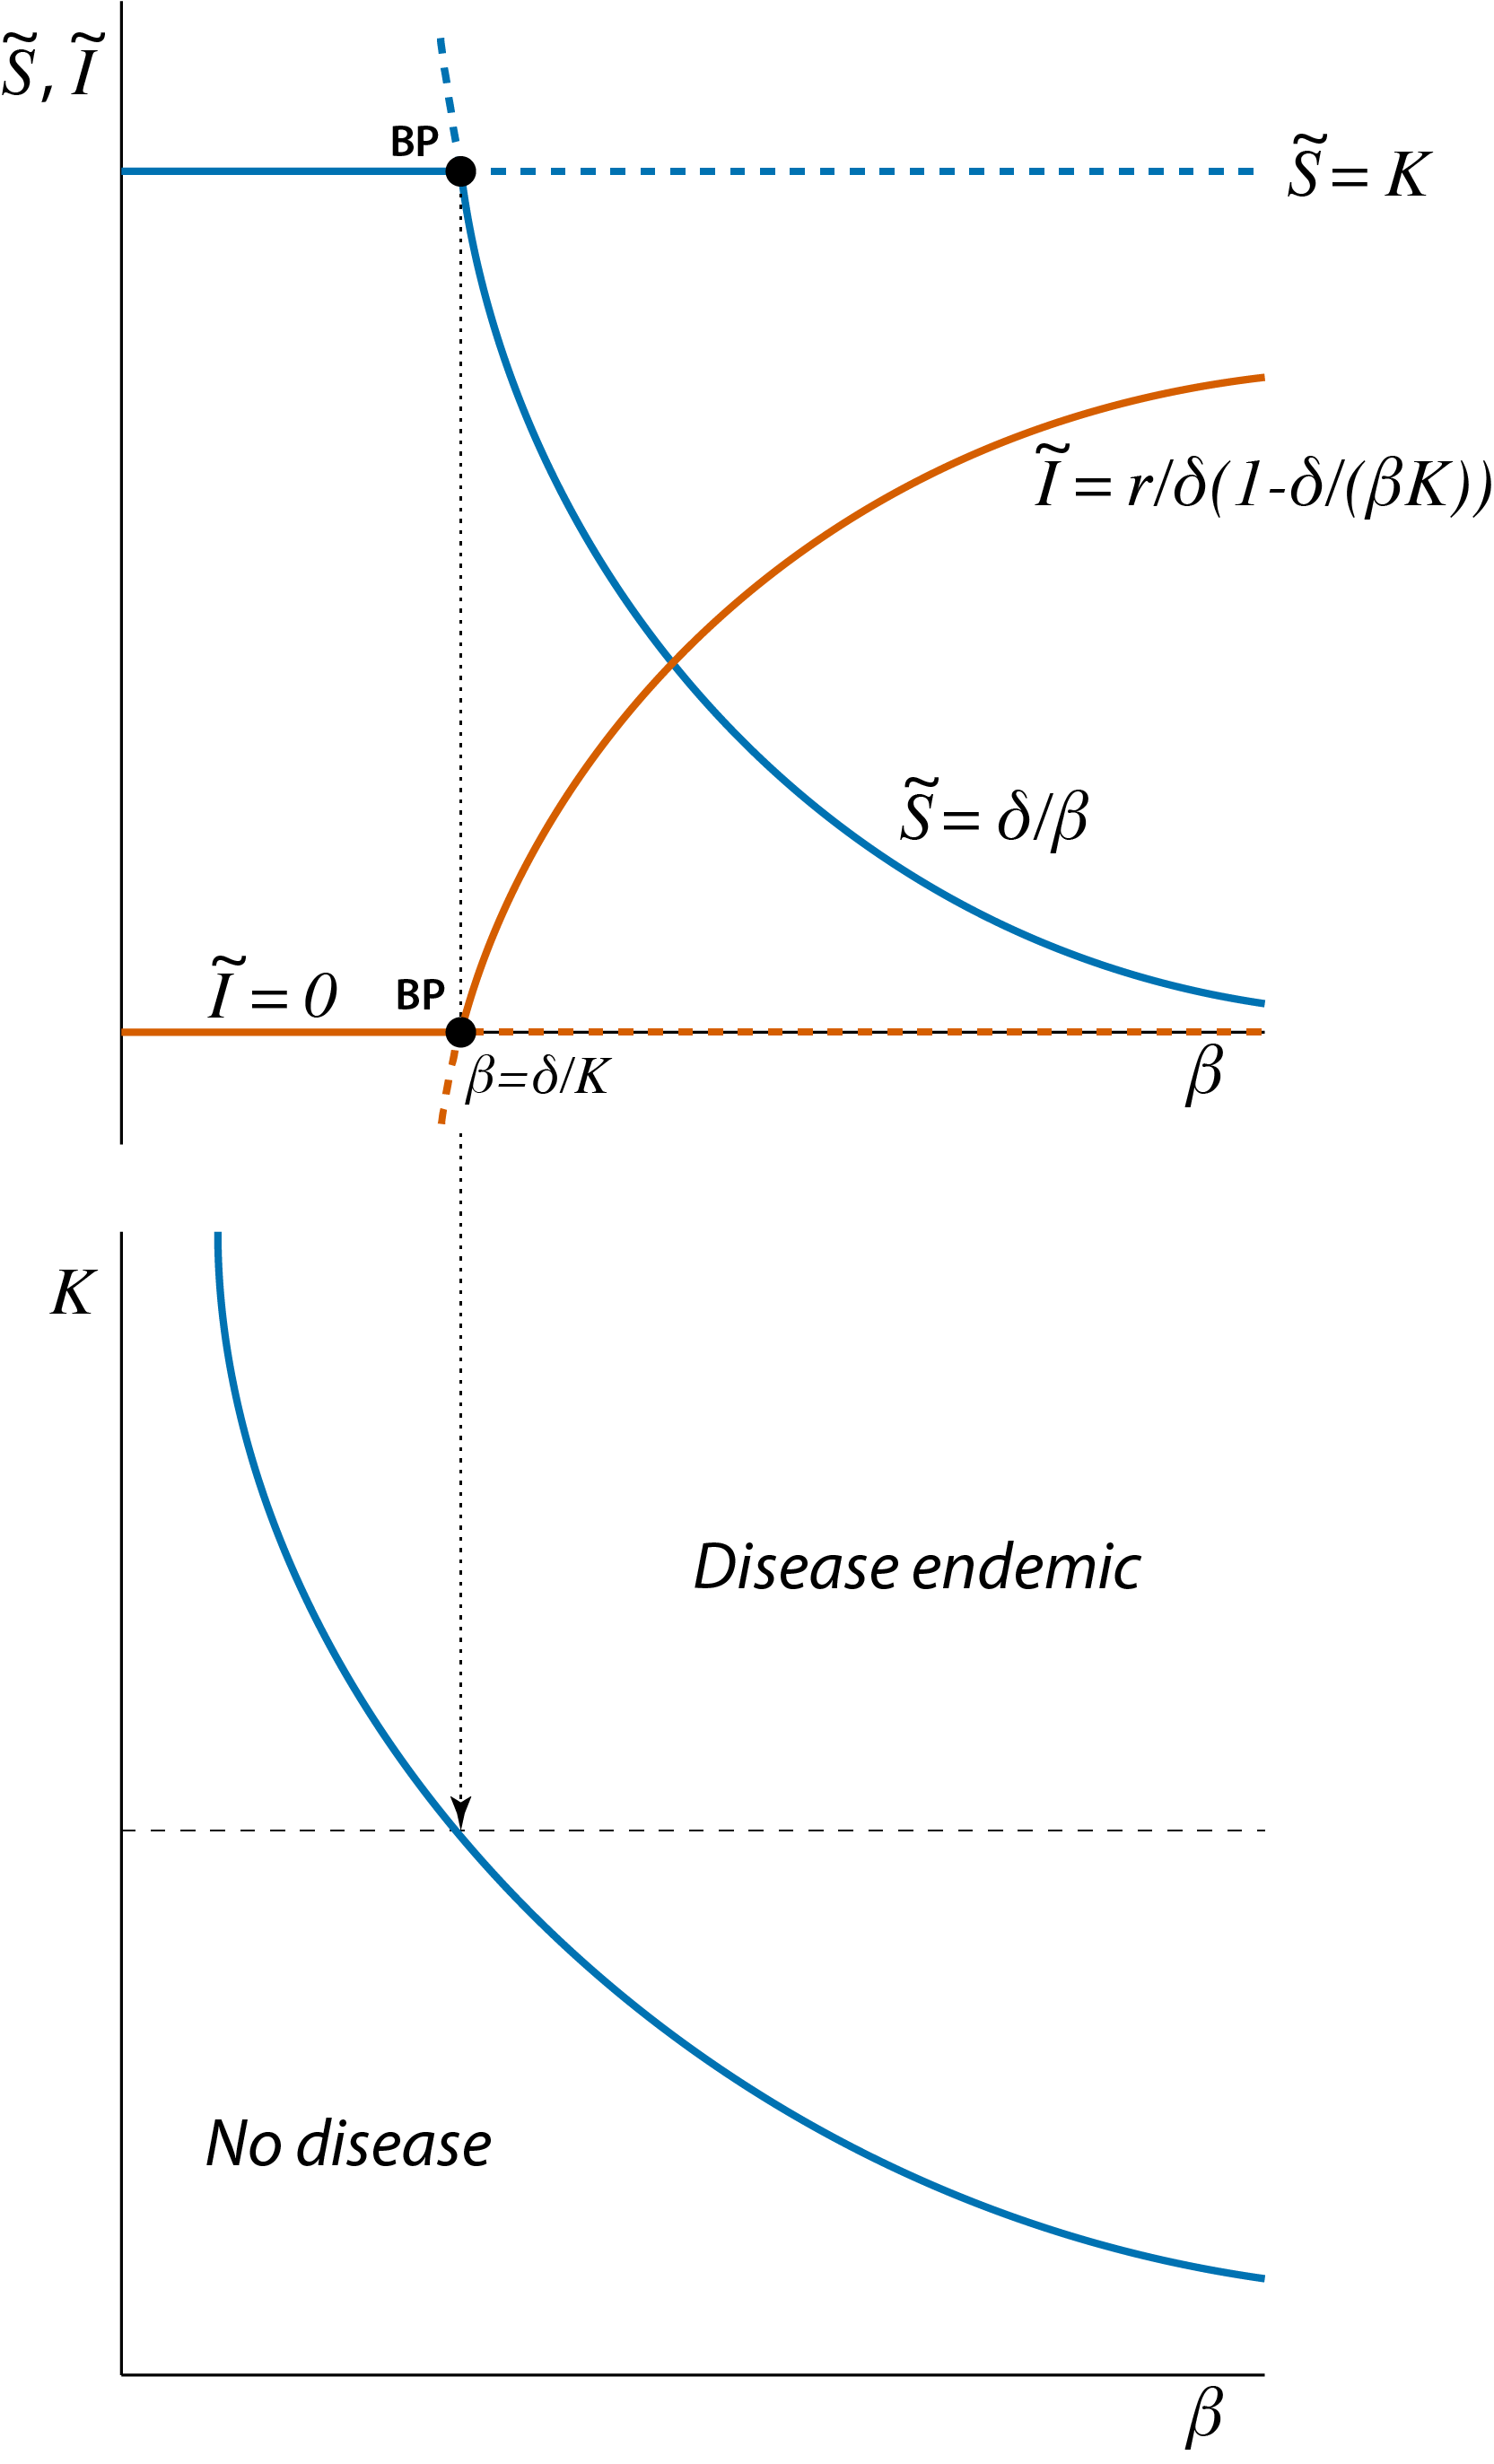 Relation between the bifurcation graph of the epidemic model (*top panel*, also shown in figure \@ref(fig:SImodelBeta)) and the two-parameter graph with different dynamical regimes of the model as a function of the model parameters $\beta$ and $K$ (*bottom panel*). The branching point shown in the top panel corresponds to a single point on the curve in the two-parameter graph that shows the boundary between the two different dynamical regimes.